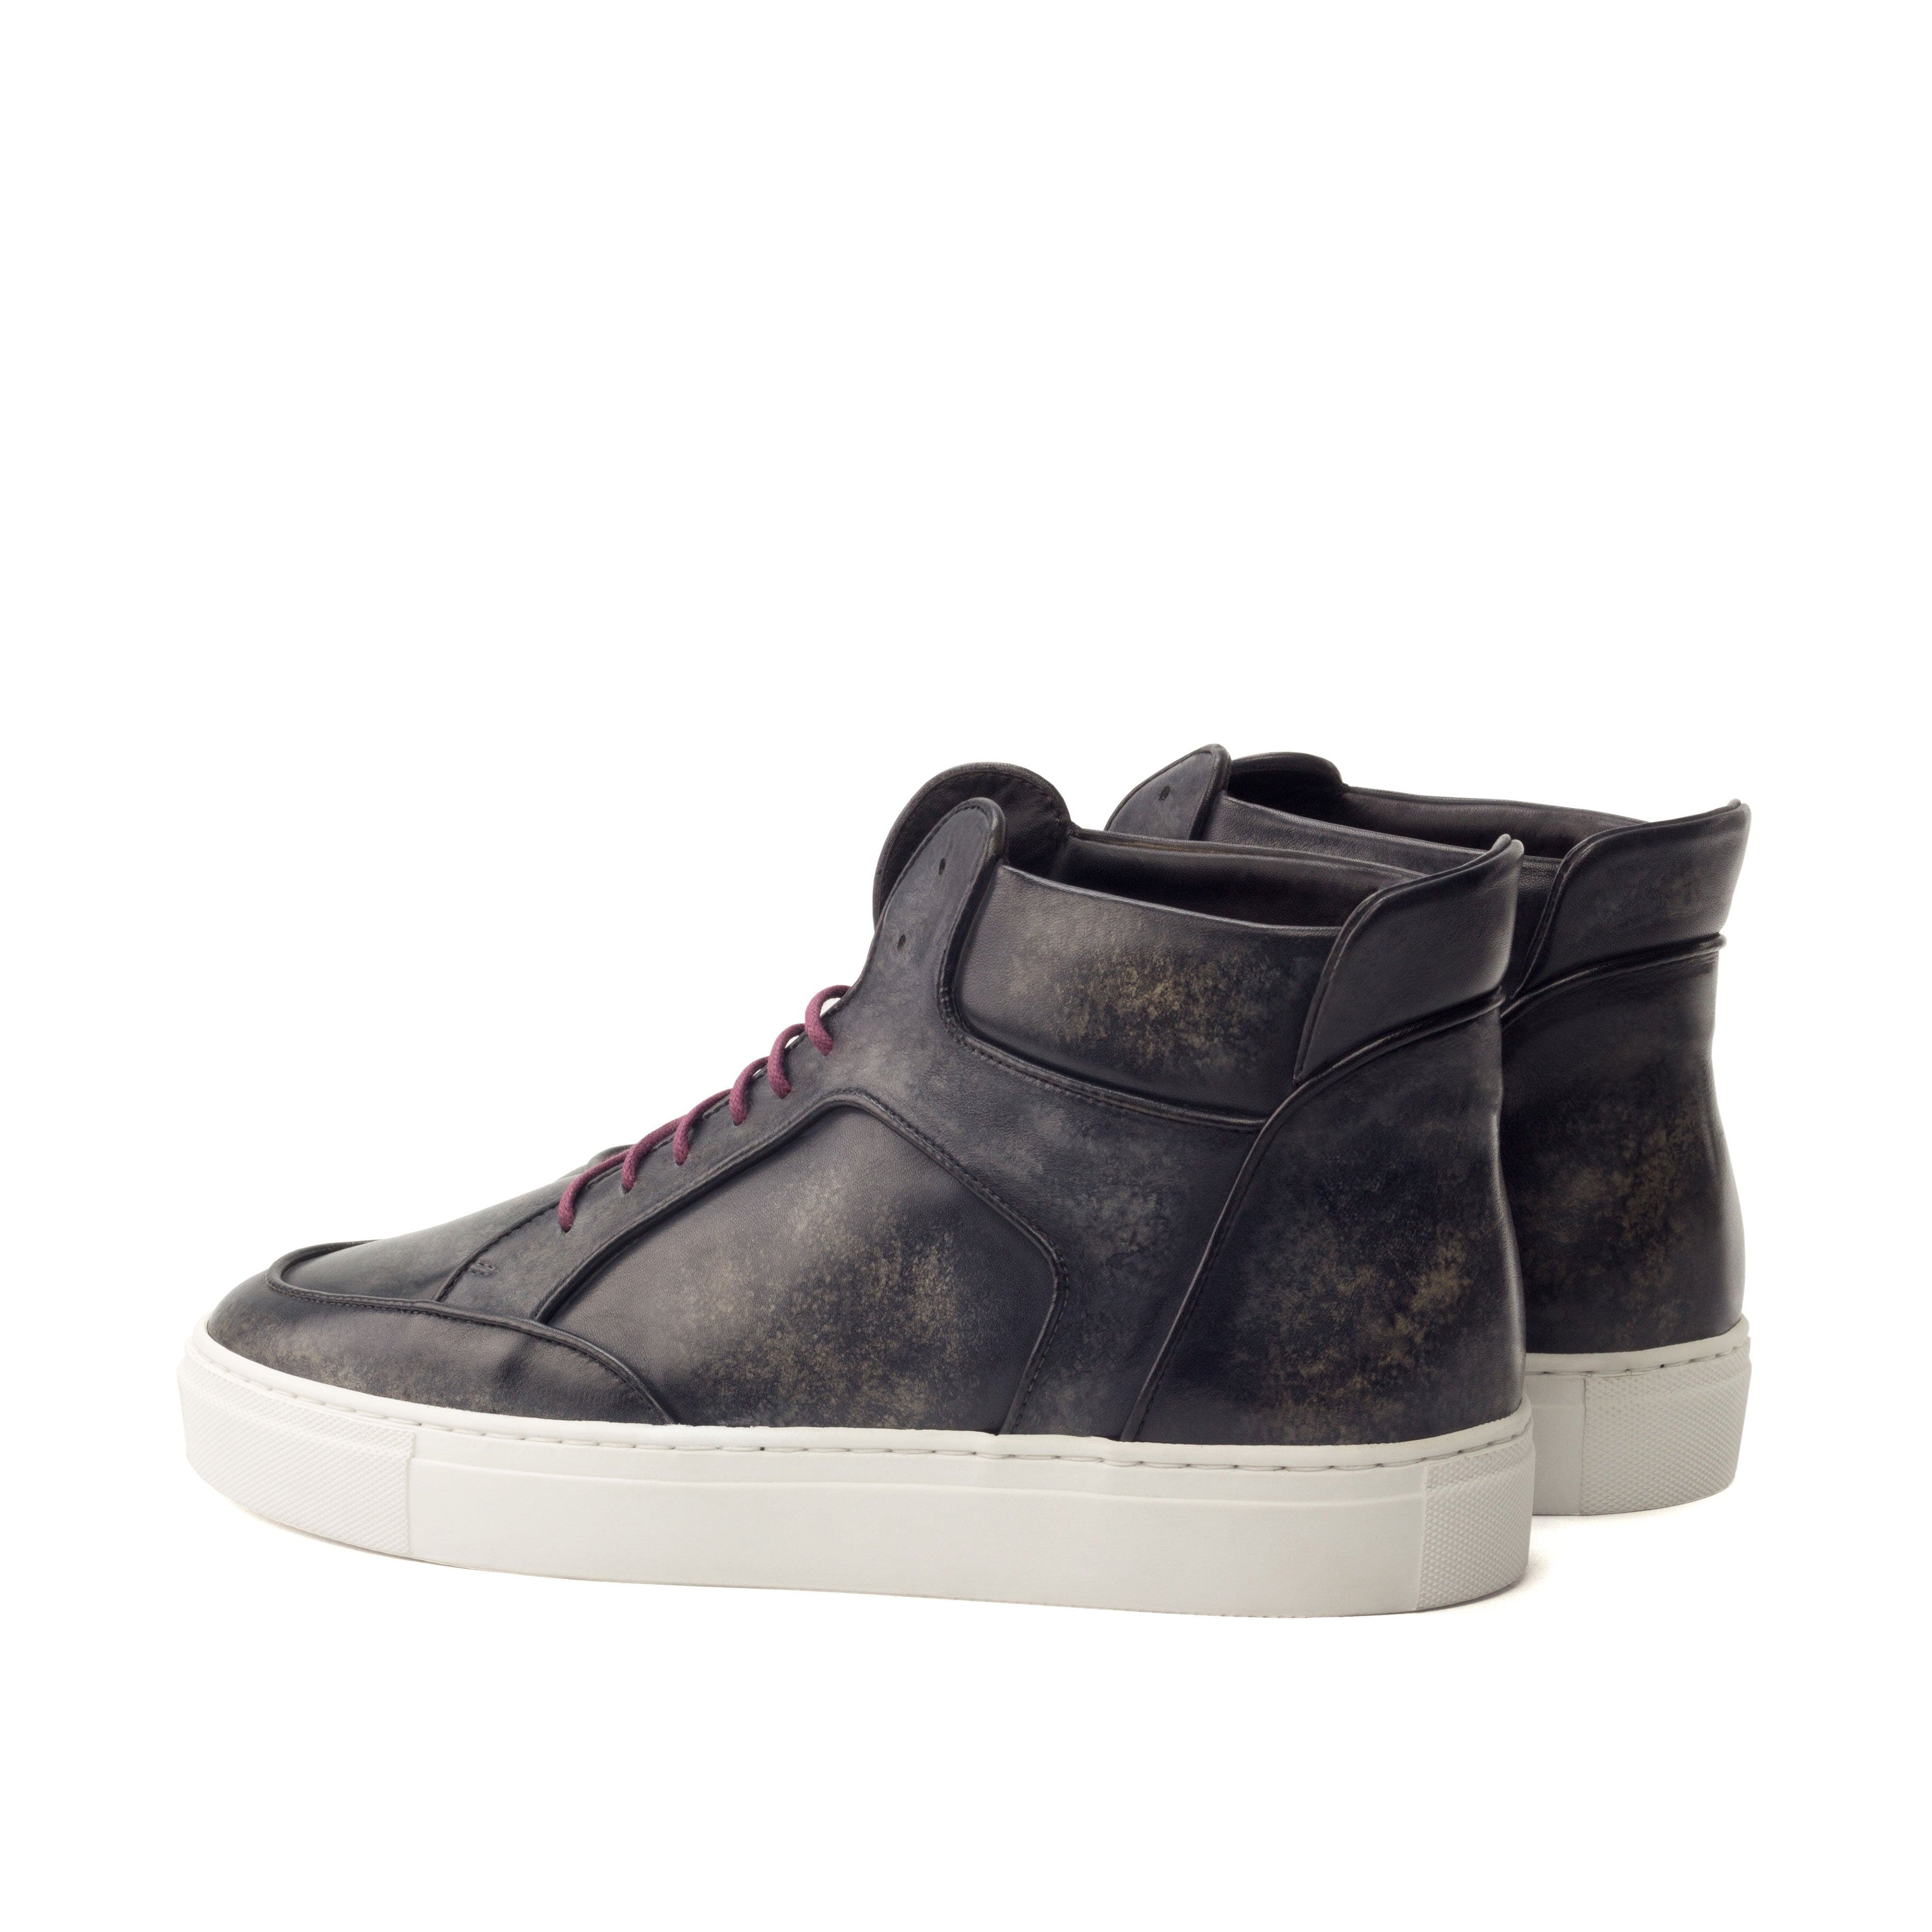 High Sneakers marble grey patina